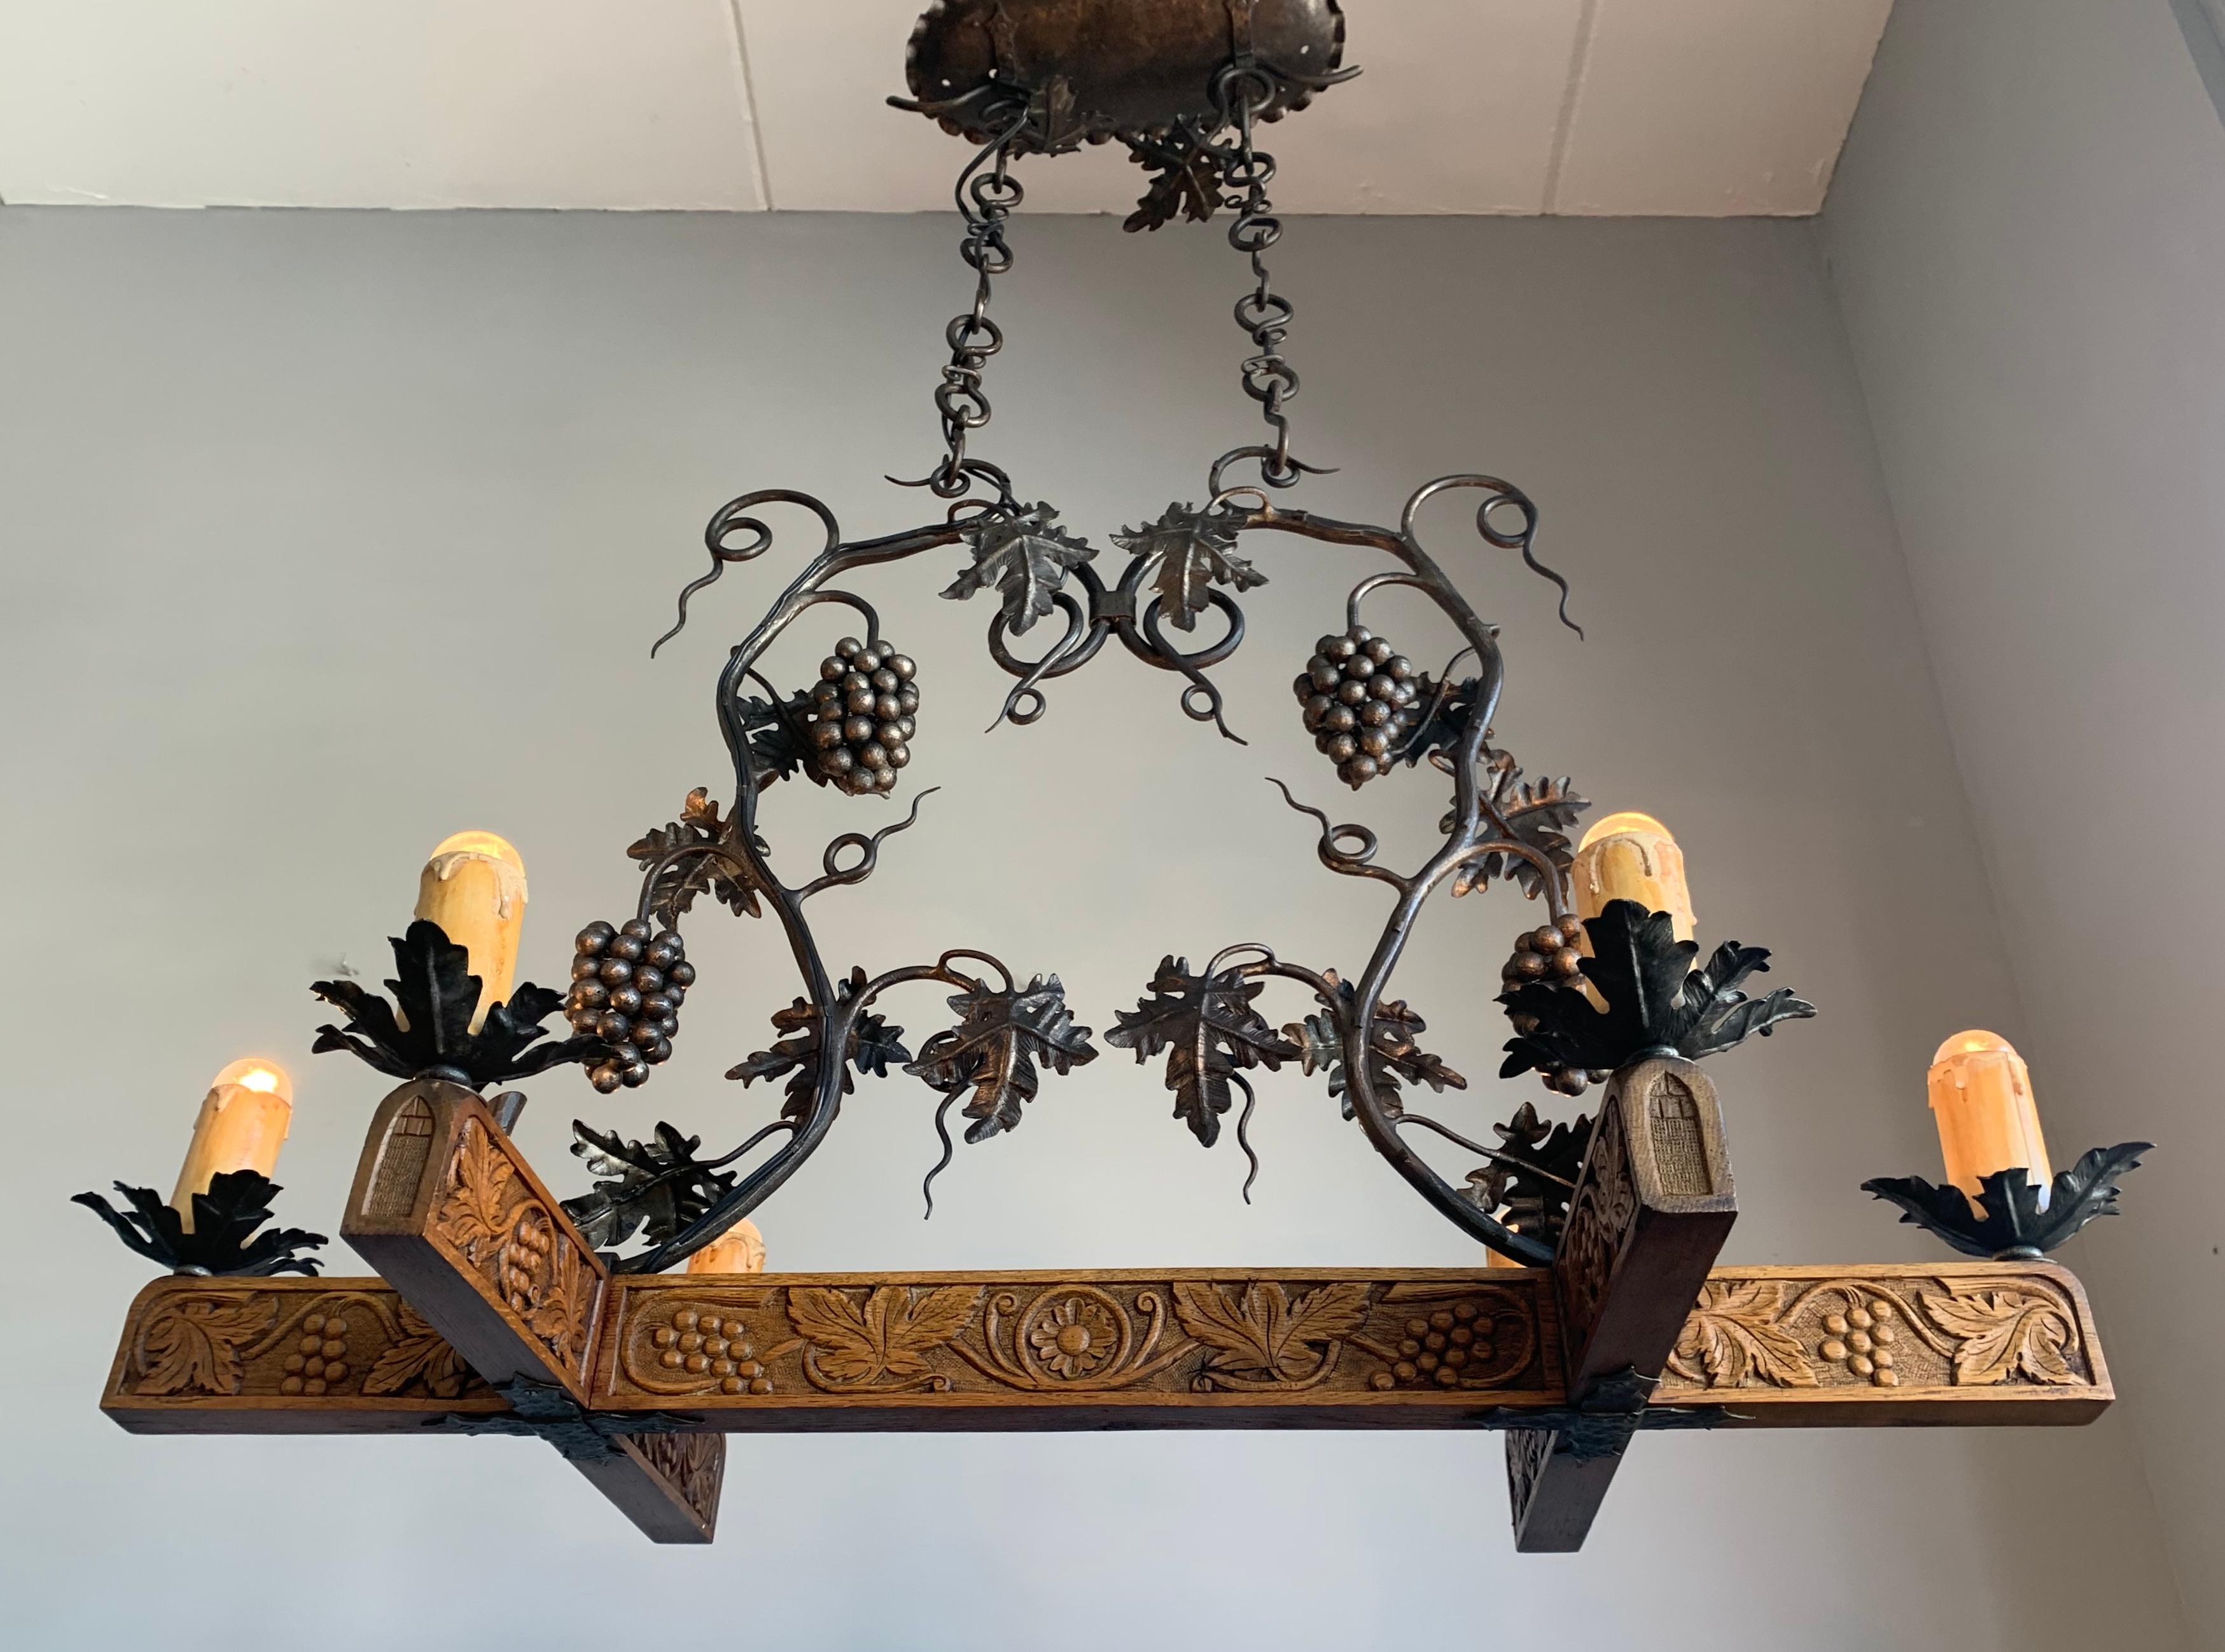 Rare and remarkable, wine theme Arts & Crafts work of lighting art.

The top quality craftsmanship that was put into this very well designed and amazingly decorative chandelier makes it the eyecatcher that she is. It is antique chandeliers like this